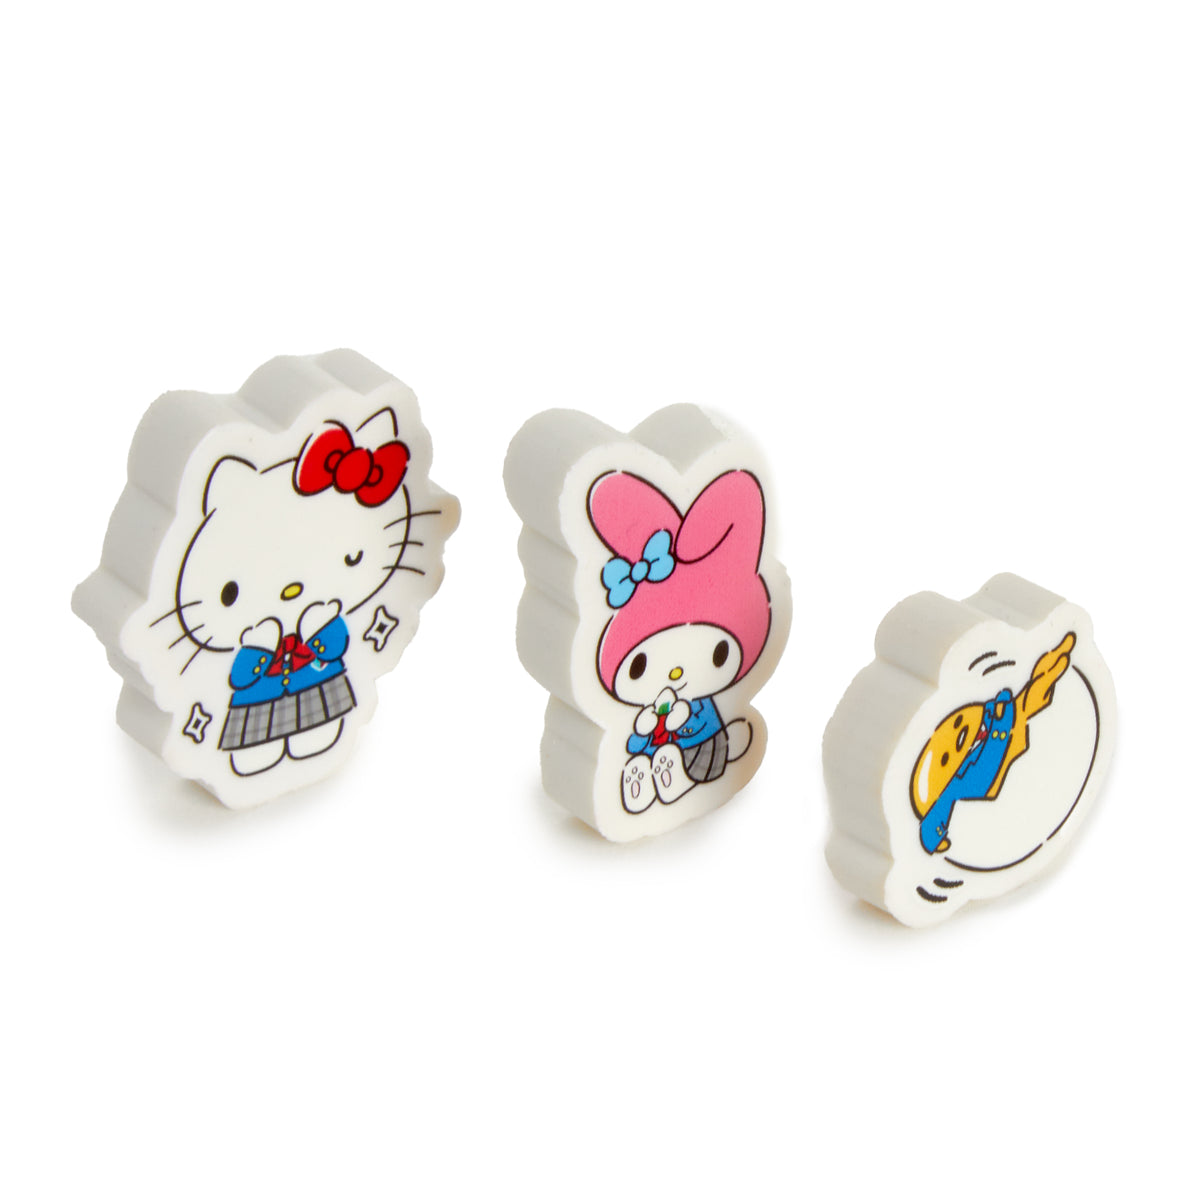 Hello Kitty and Friends Time for Class 3-Piece Eraser Set Stationery Sanrio   